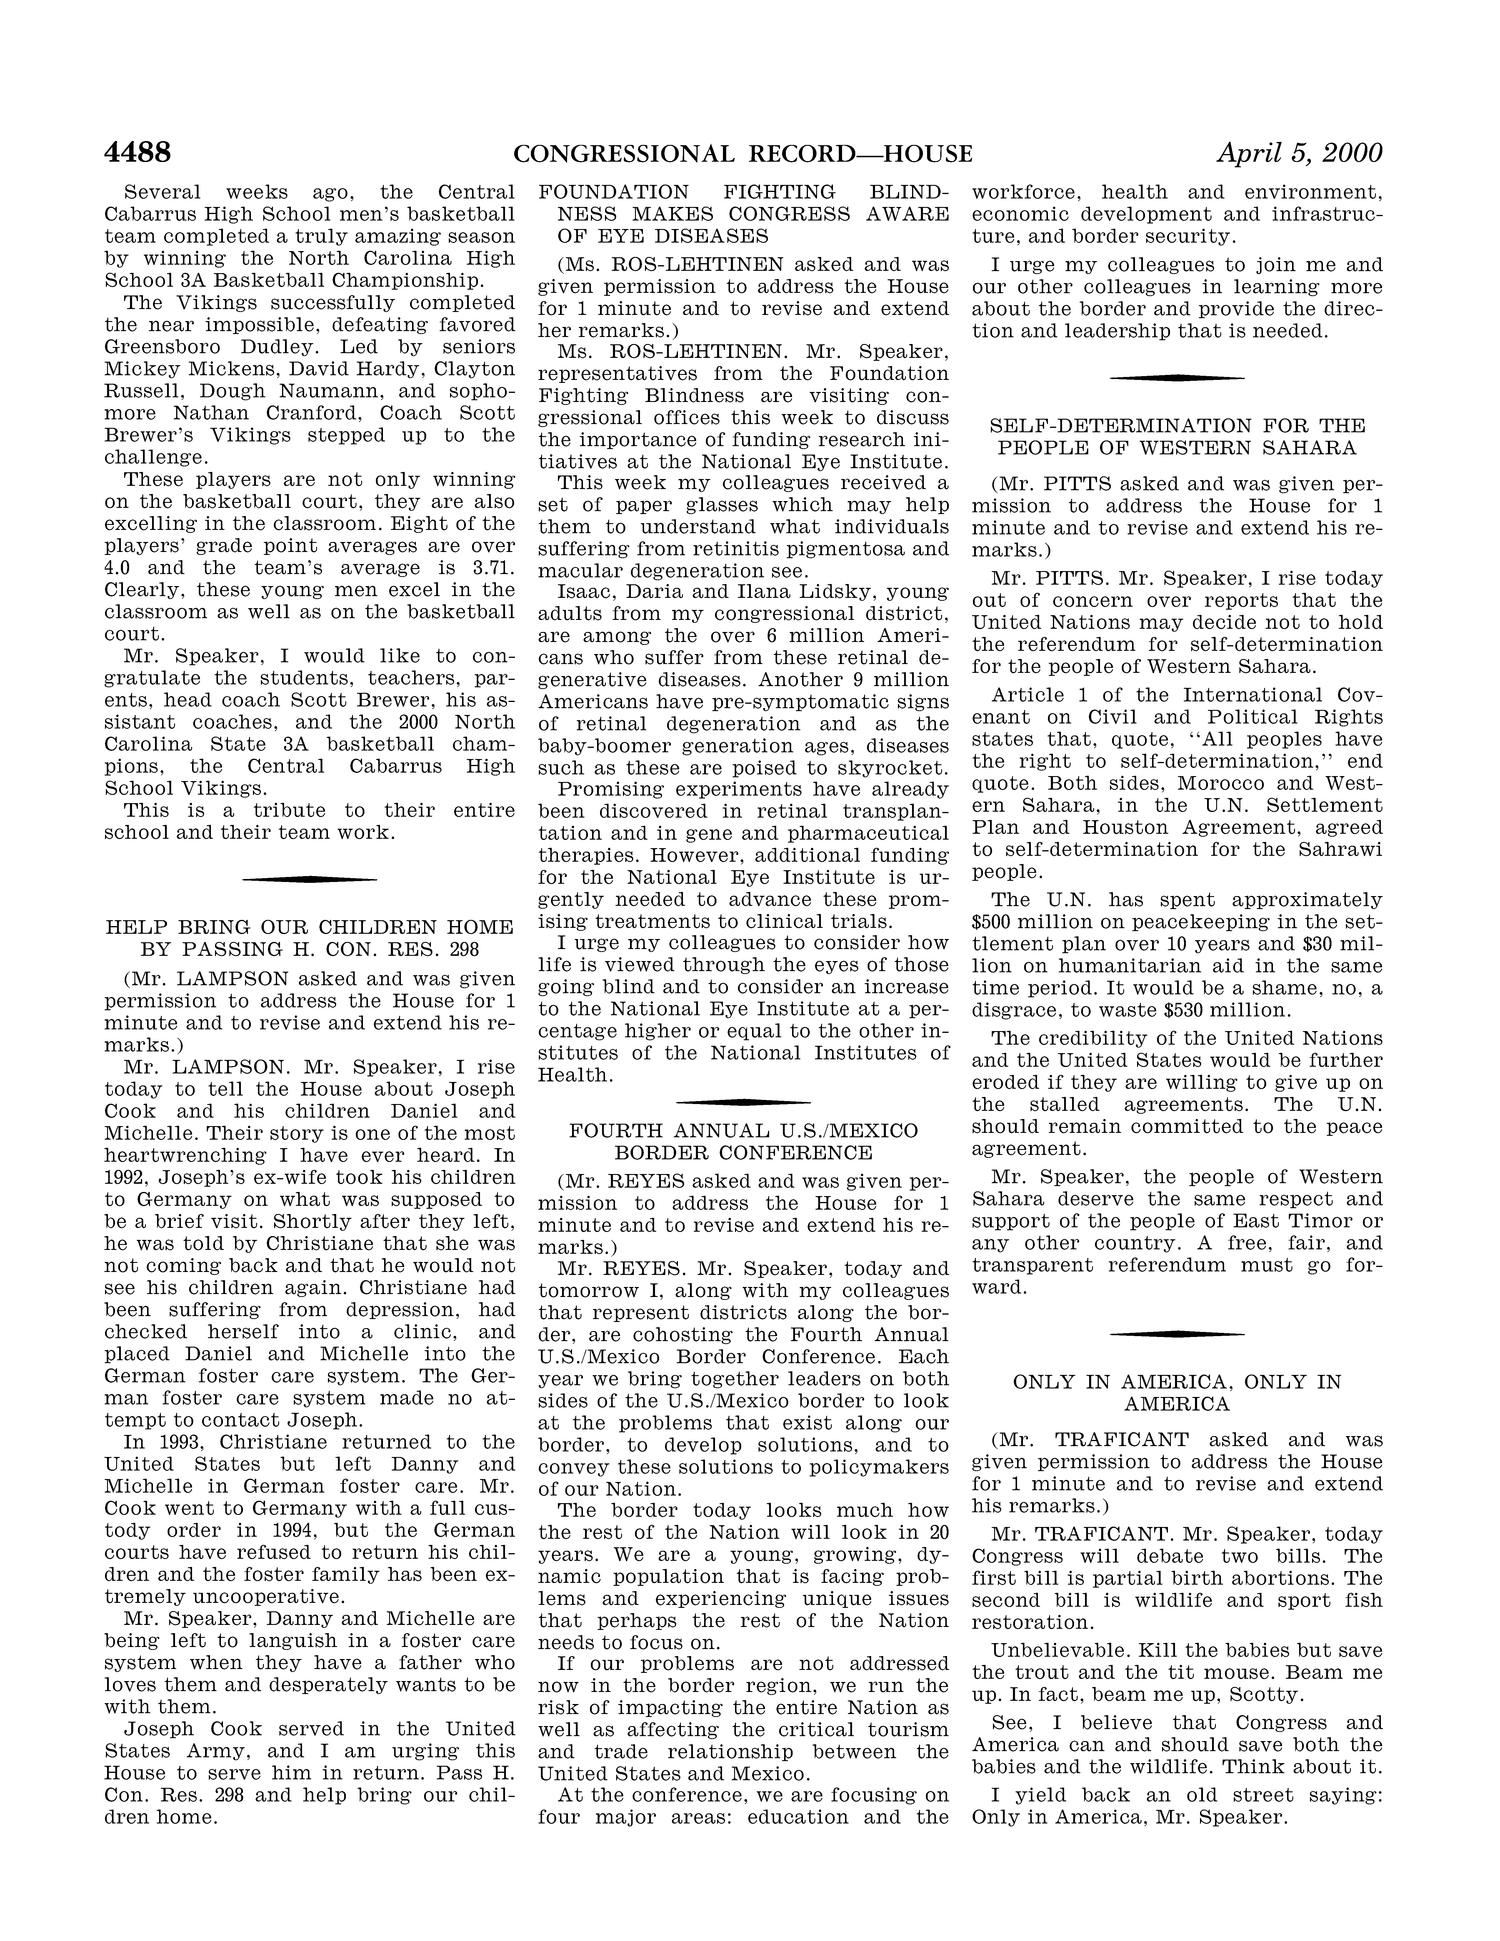 Congressional Record: Proceedings and Debates of the 106th Congress, Second Session, Volume 146, Part 4
                                                
                                                    4488
                                                